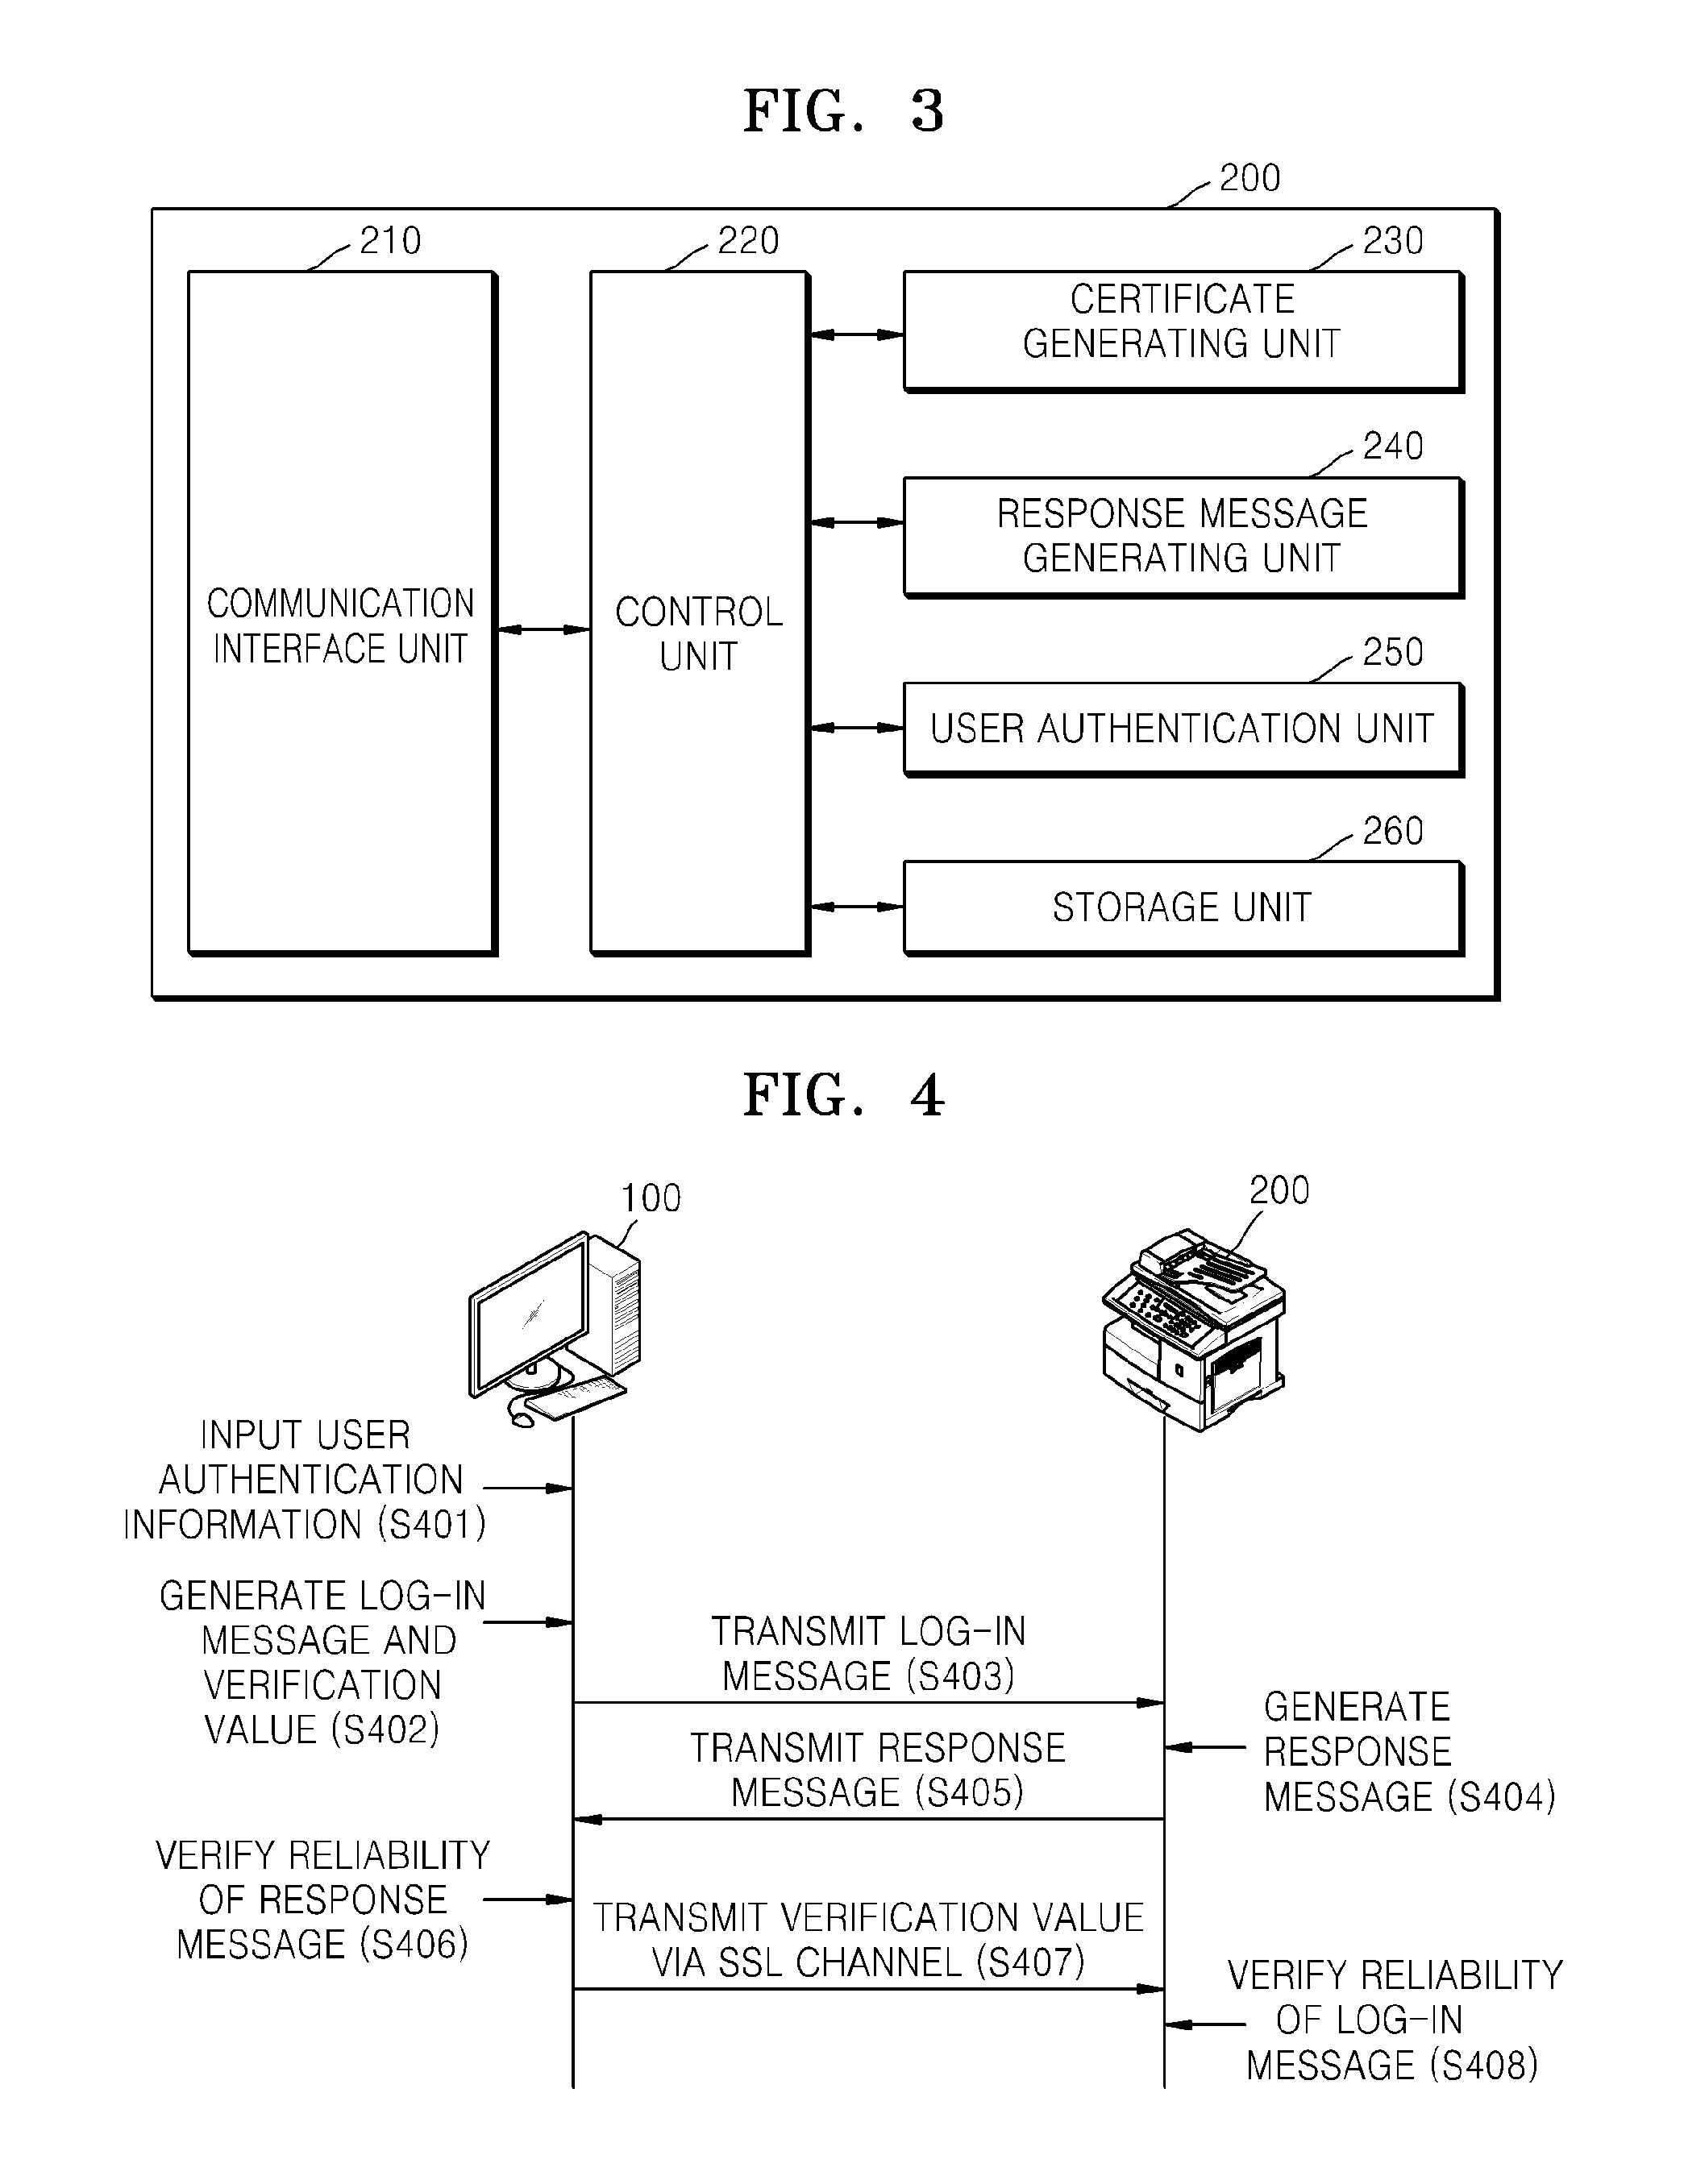 User authentication method using self-signed certificate of web server, client device and electronic device including web server performing the same